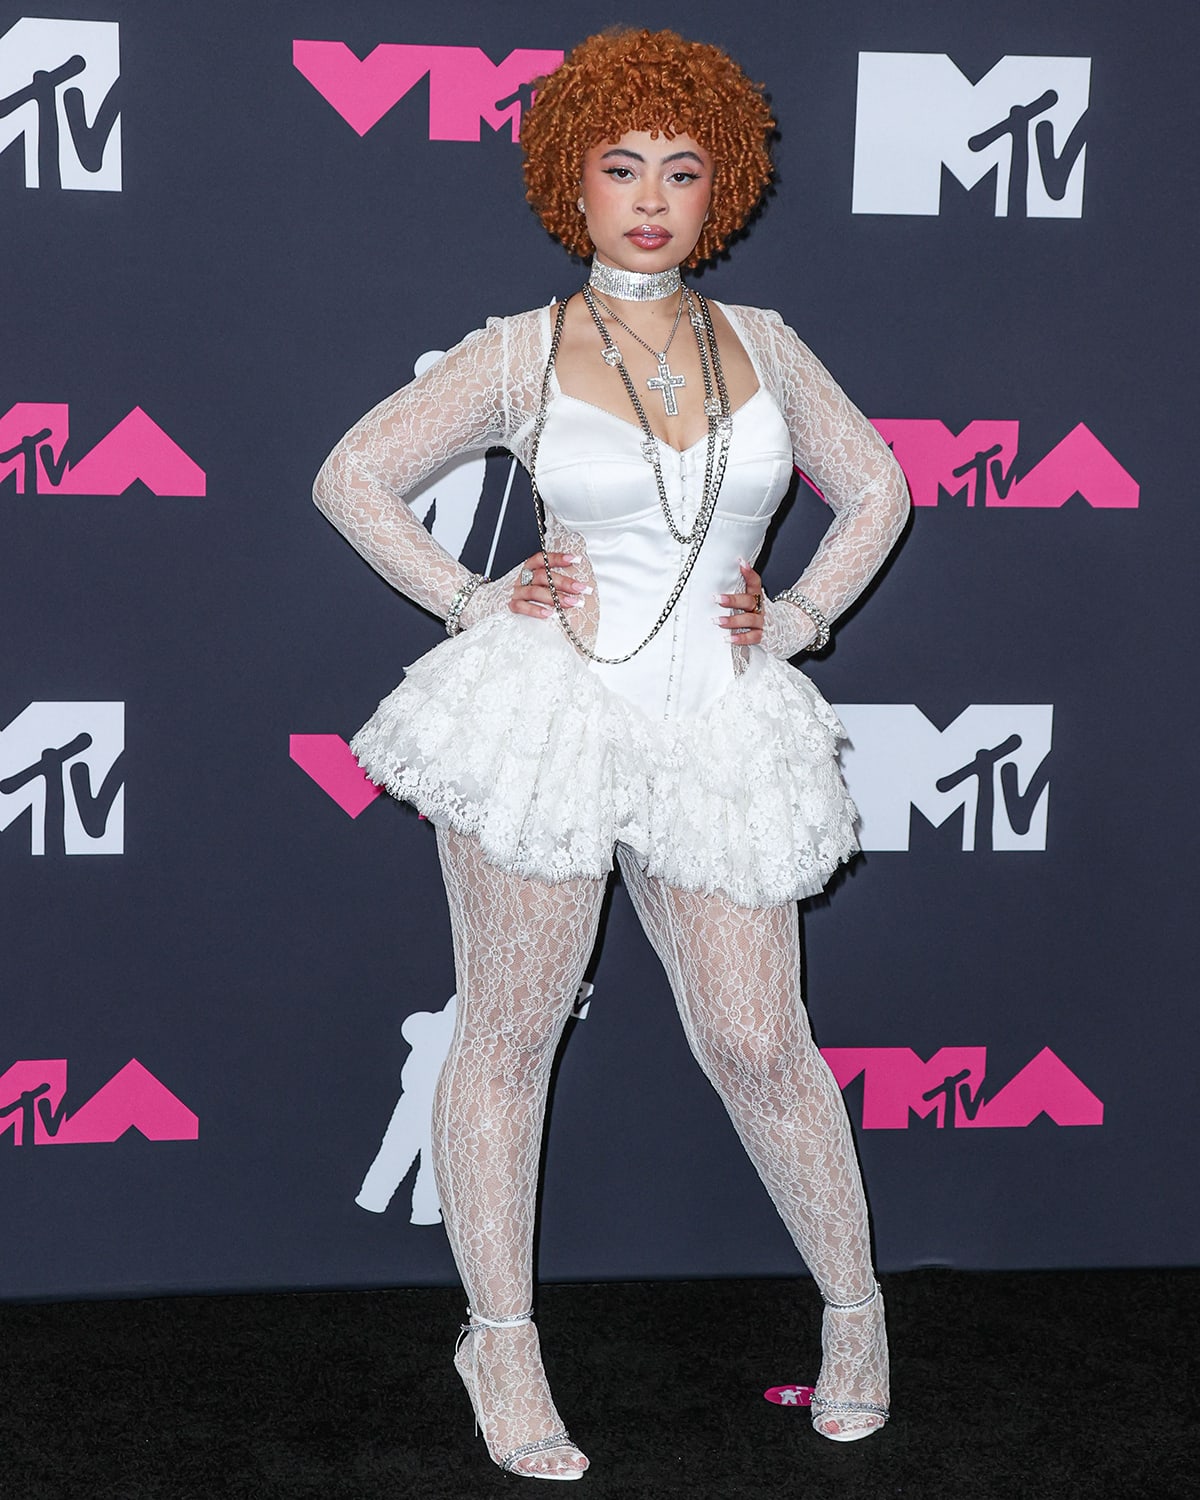 Ice Spice channels Britney Spears in a white lace ensemble at the 2023 Video Music Awards held at the Prudential Center in New Jersey on September 12, 2023